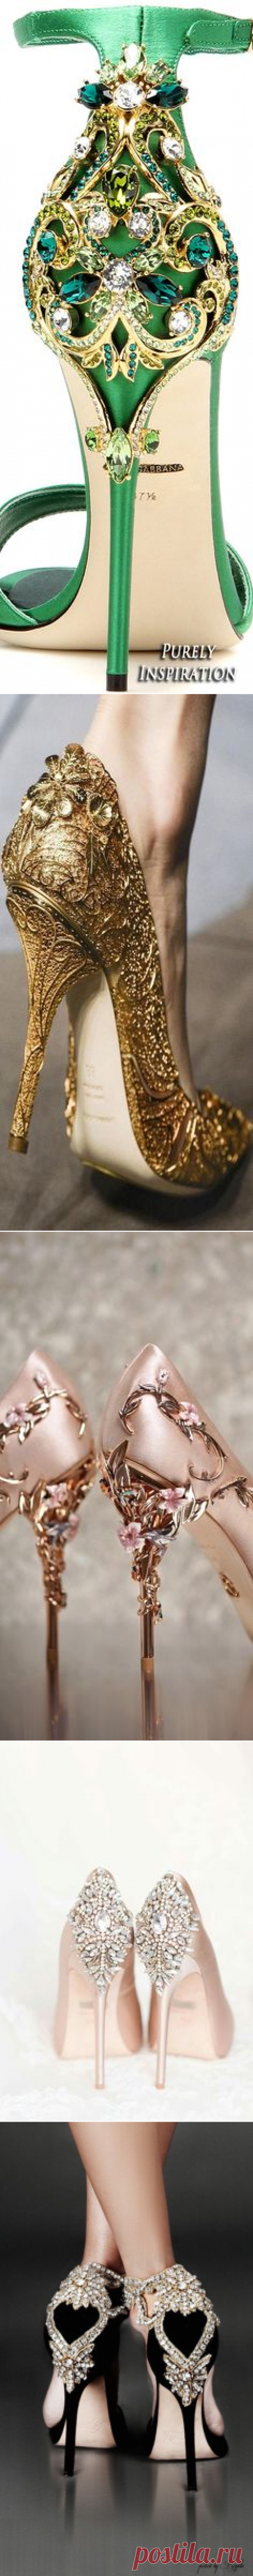 🔵 50 Fab High Heel Shoes From Pinterest | Trends 2015 2016, Fall winter shoes and Street styles